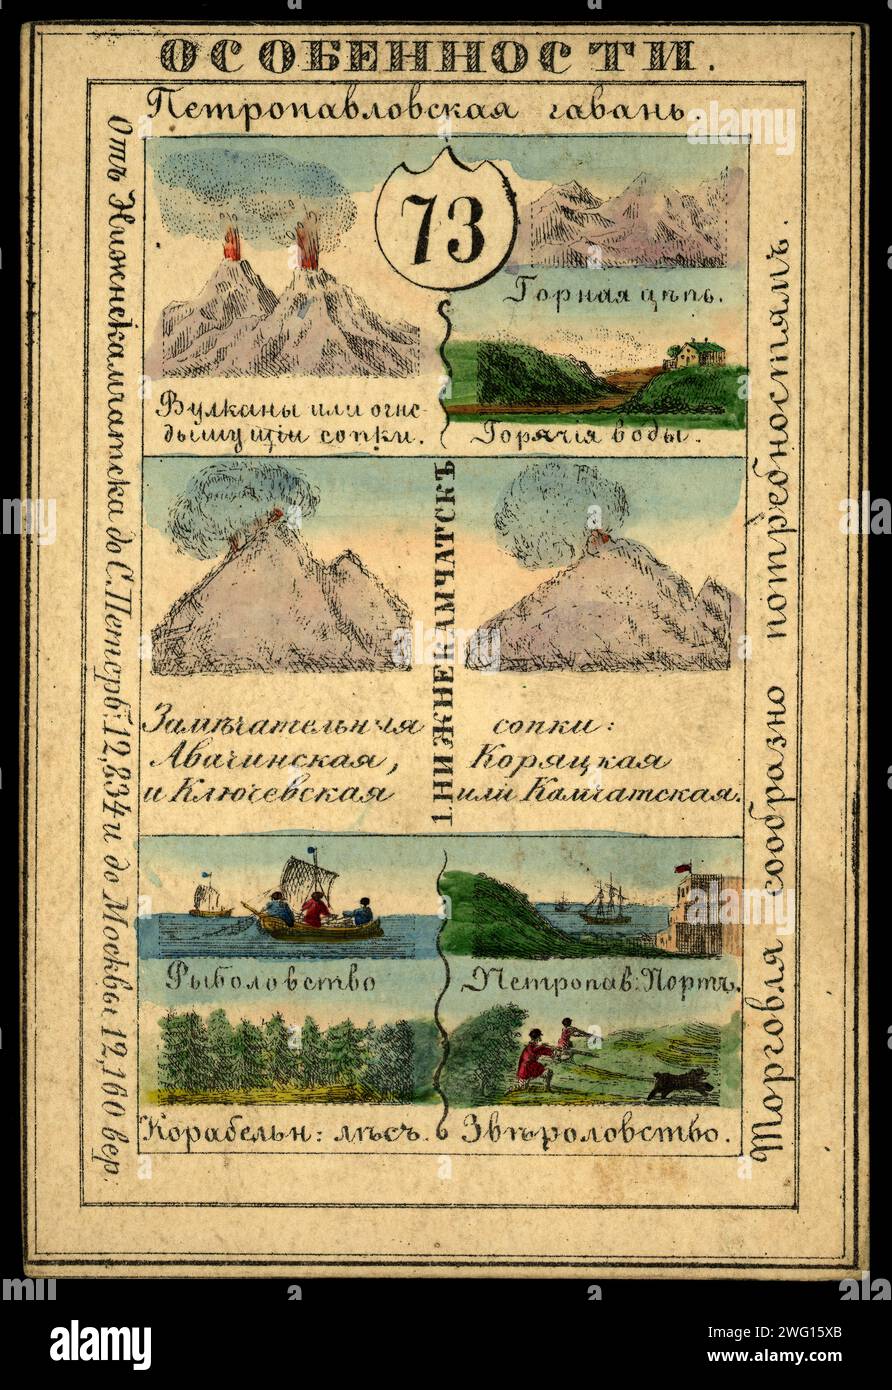 Land of Chukotka and Kamchatka Region, 1856. This card is one of a souvenir set of 82 illustrated cards-one for each province of the Russian Empire as it existed in 1856. Each card presents an overview of a particular province's culture, history, economy, and geography. The front of the card depicts such distinguishing features as rivers, mountains, major cities, and chief industries. The back of each card contains a map of the province, the provincial seal, information about the population, and the local costume of the inhabitants. National Library of Russia Stock Photo